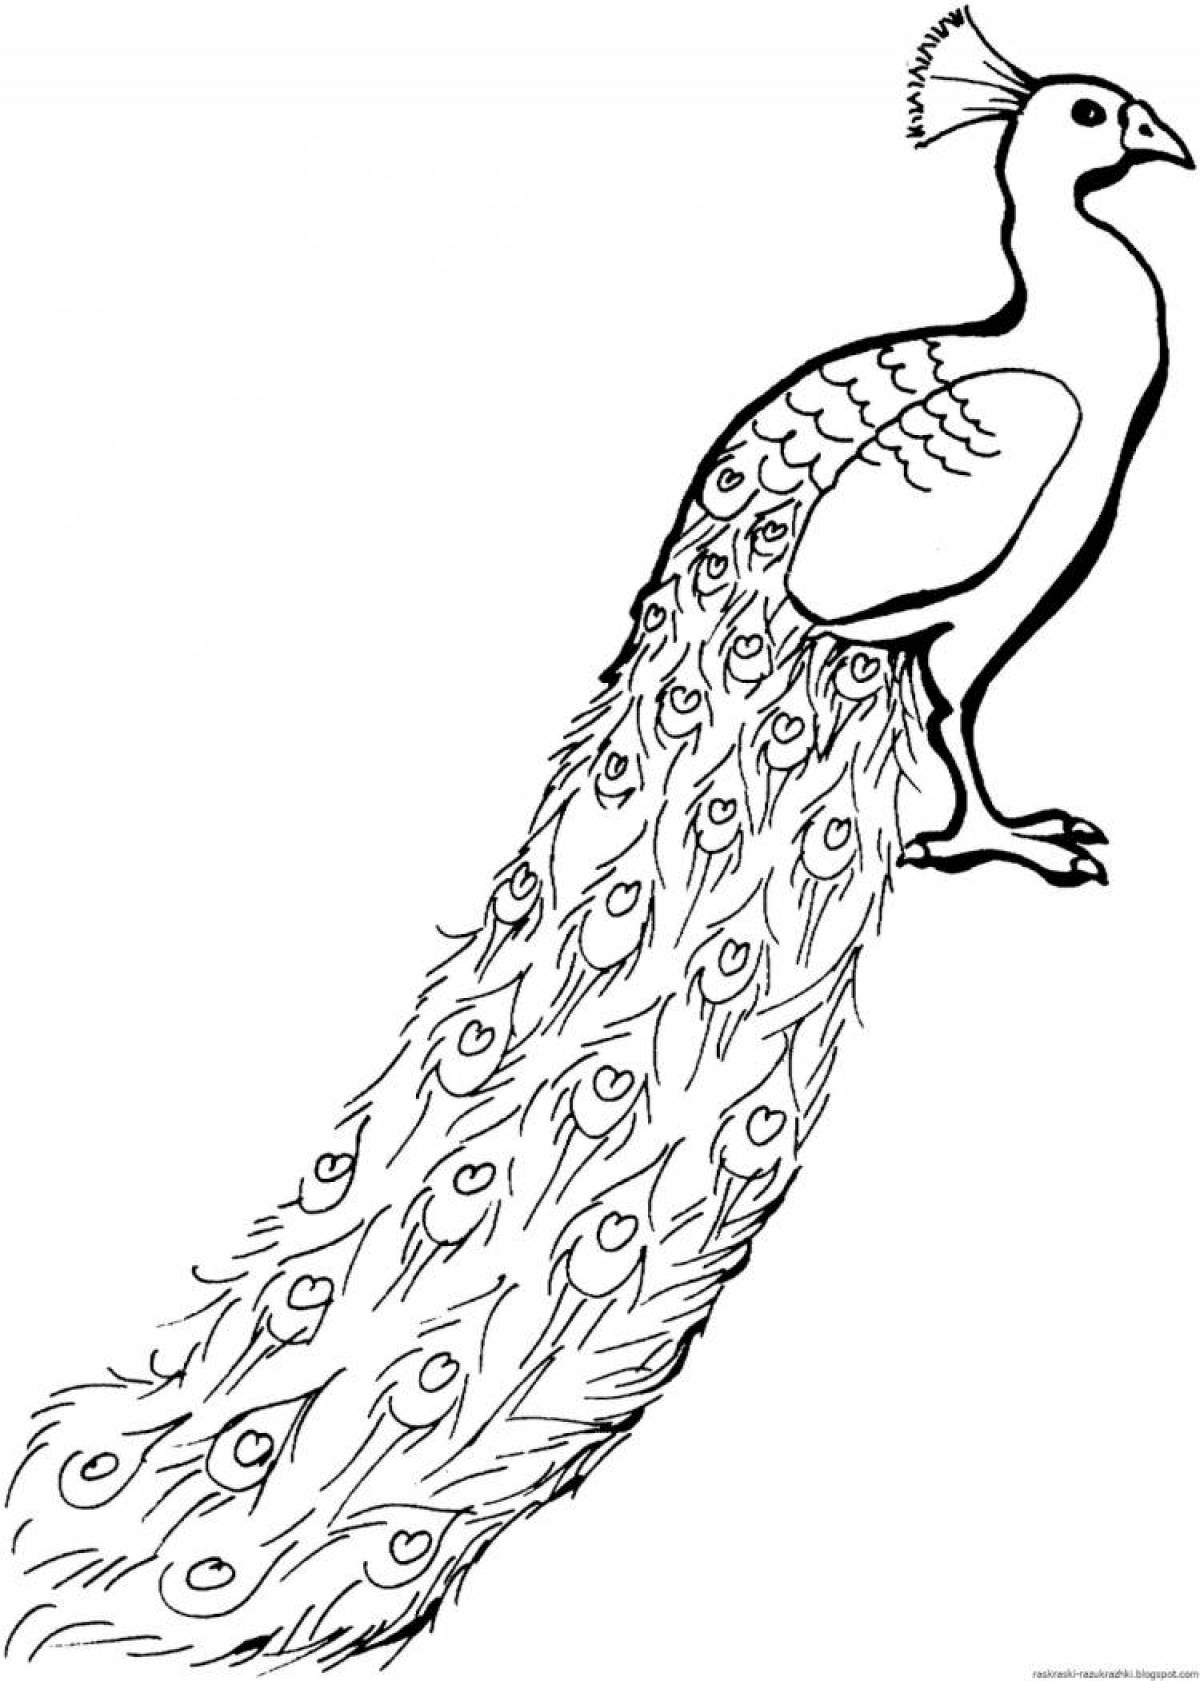 Amazing peacock coloring book for kids